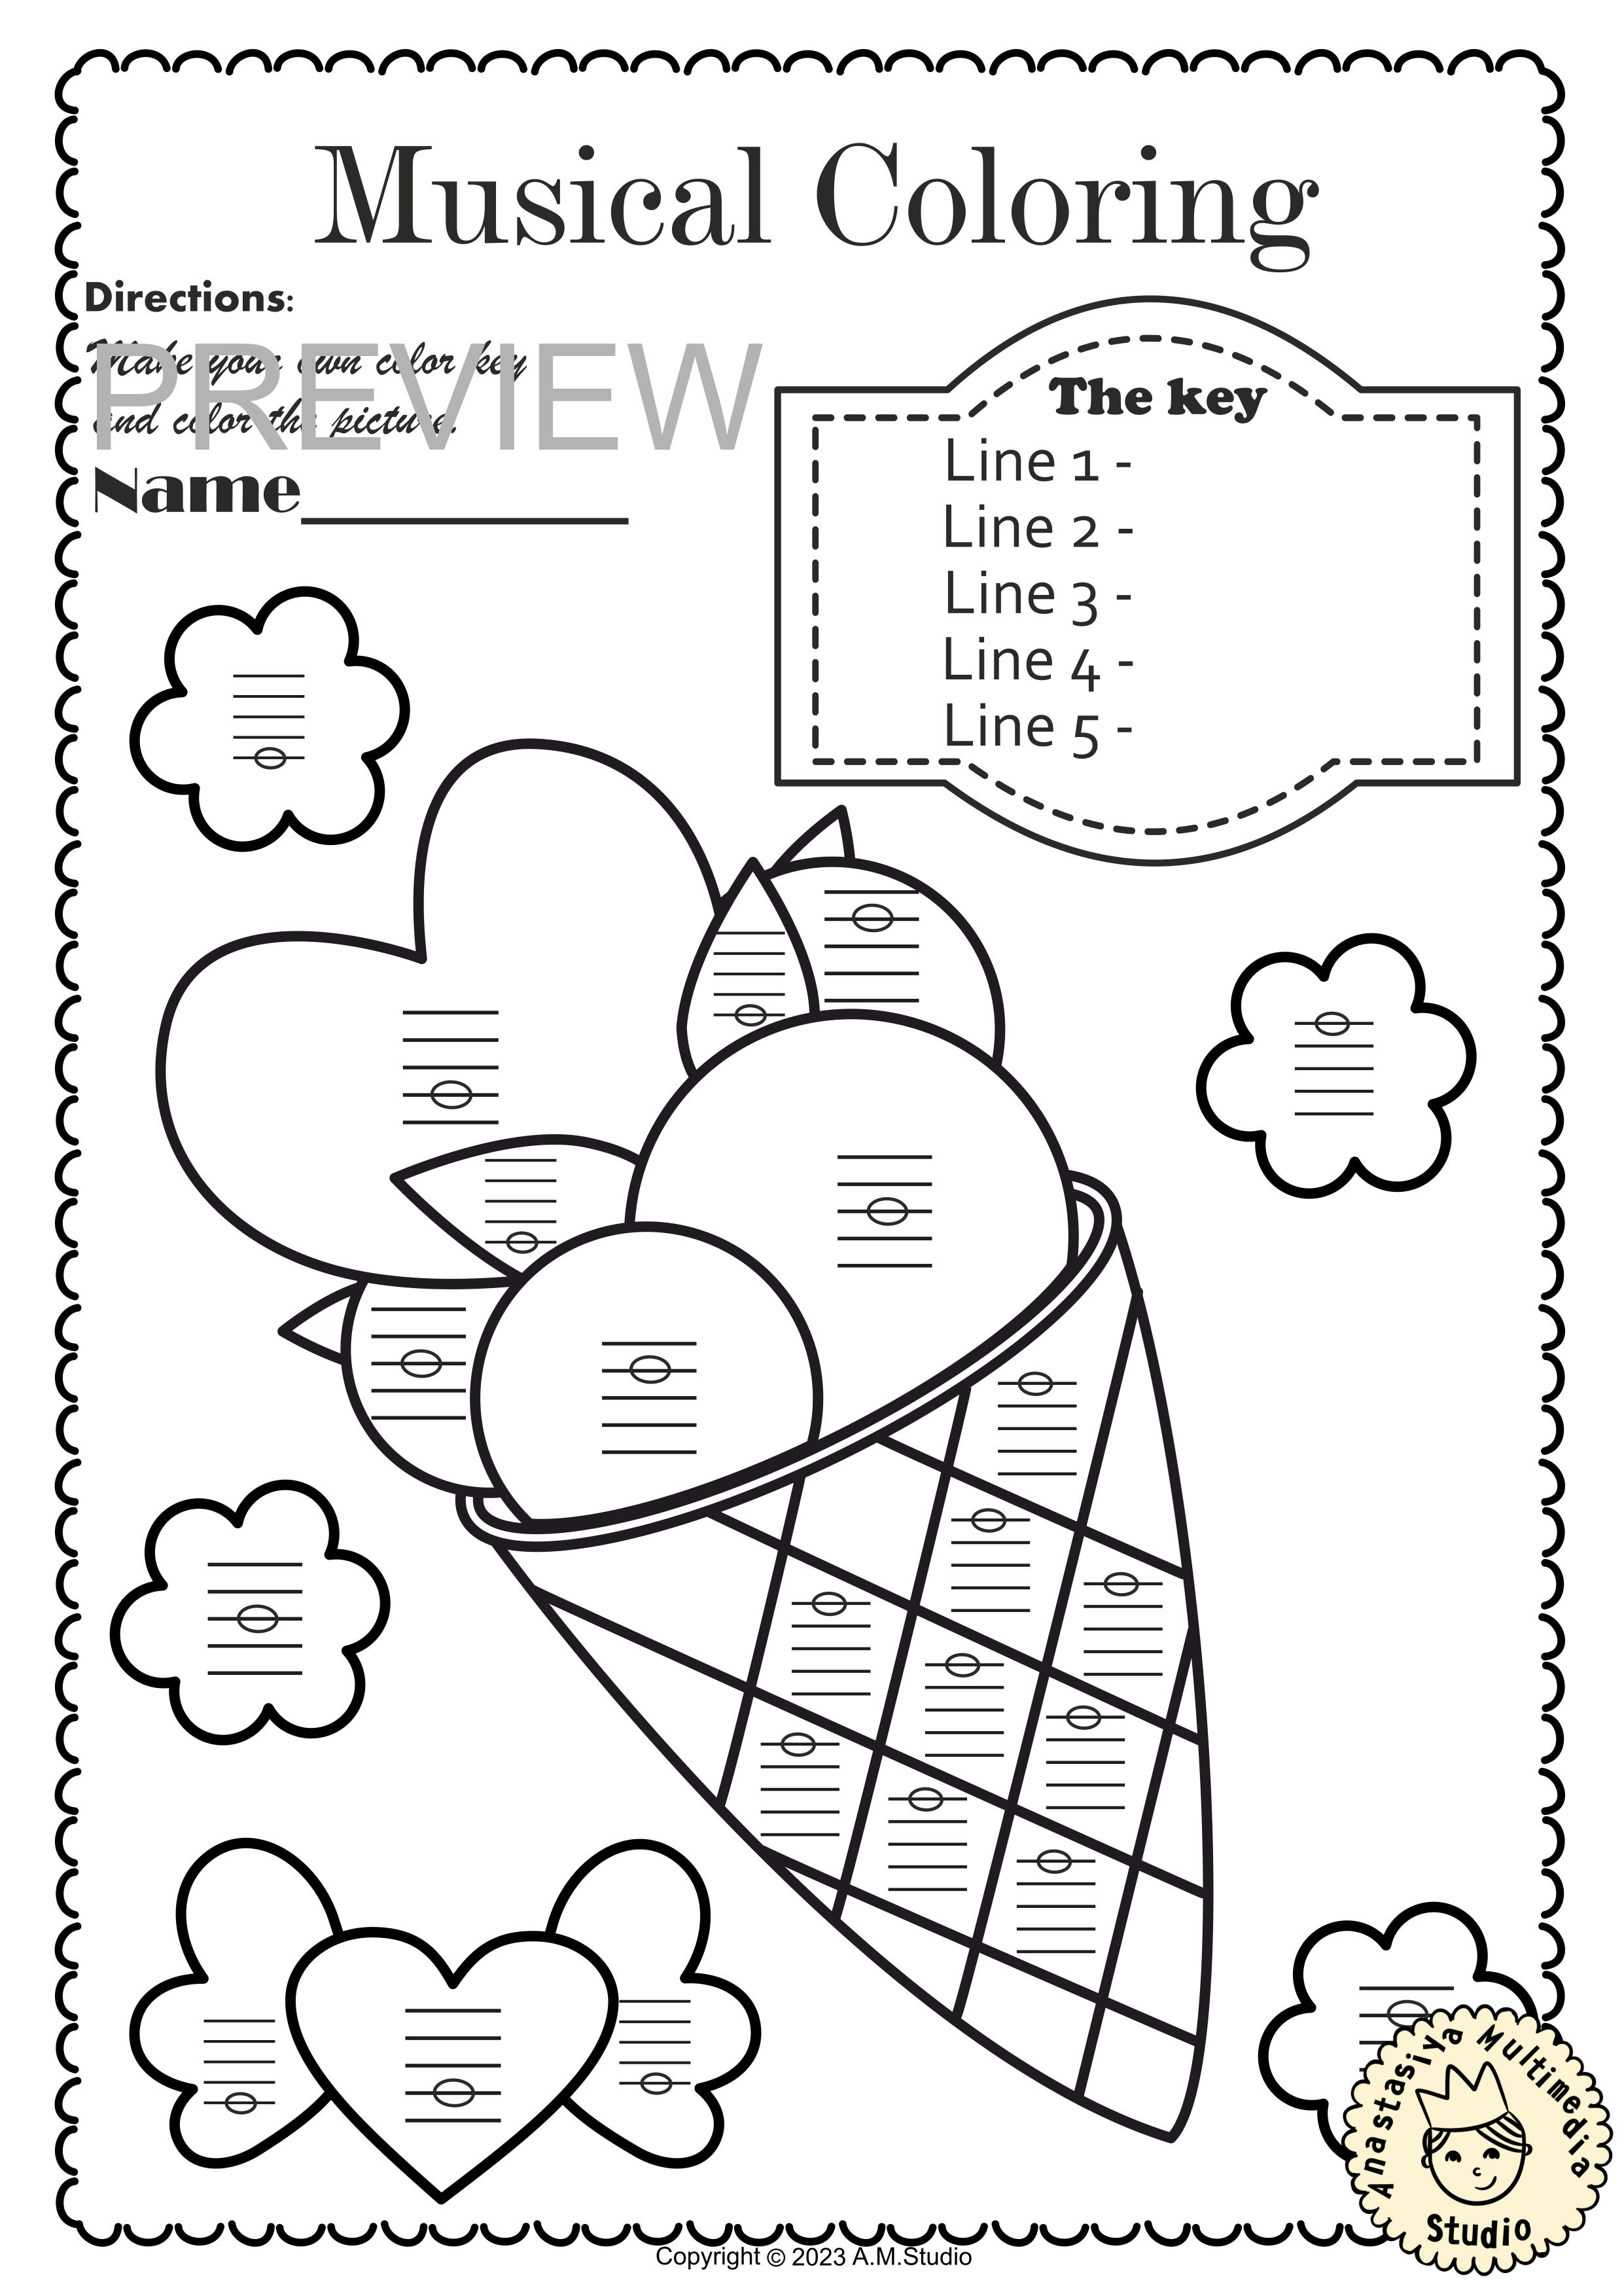 Valentine`s Day Music Coloring Pages | Color by Lines and Spaces (img # 2)